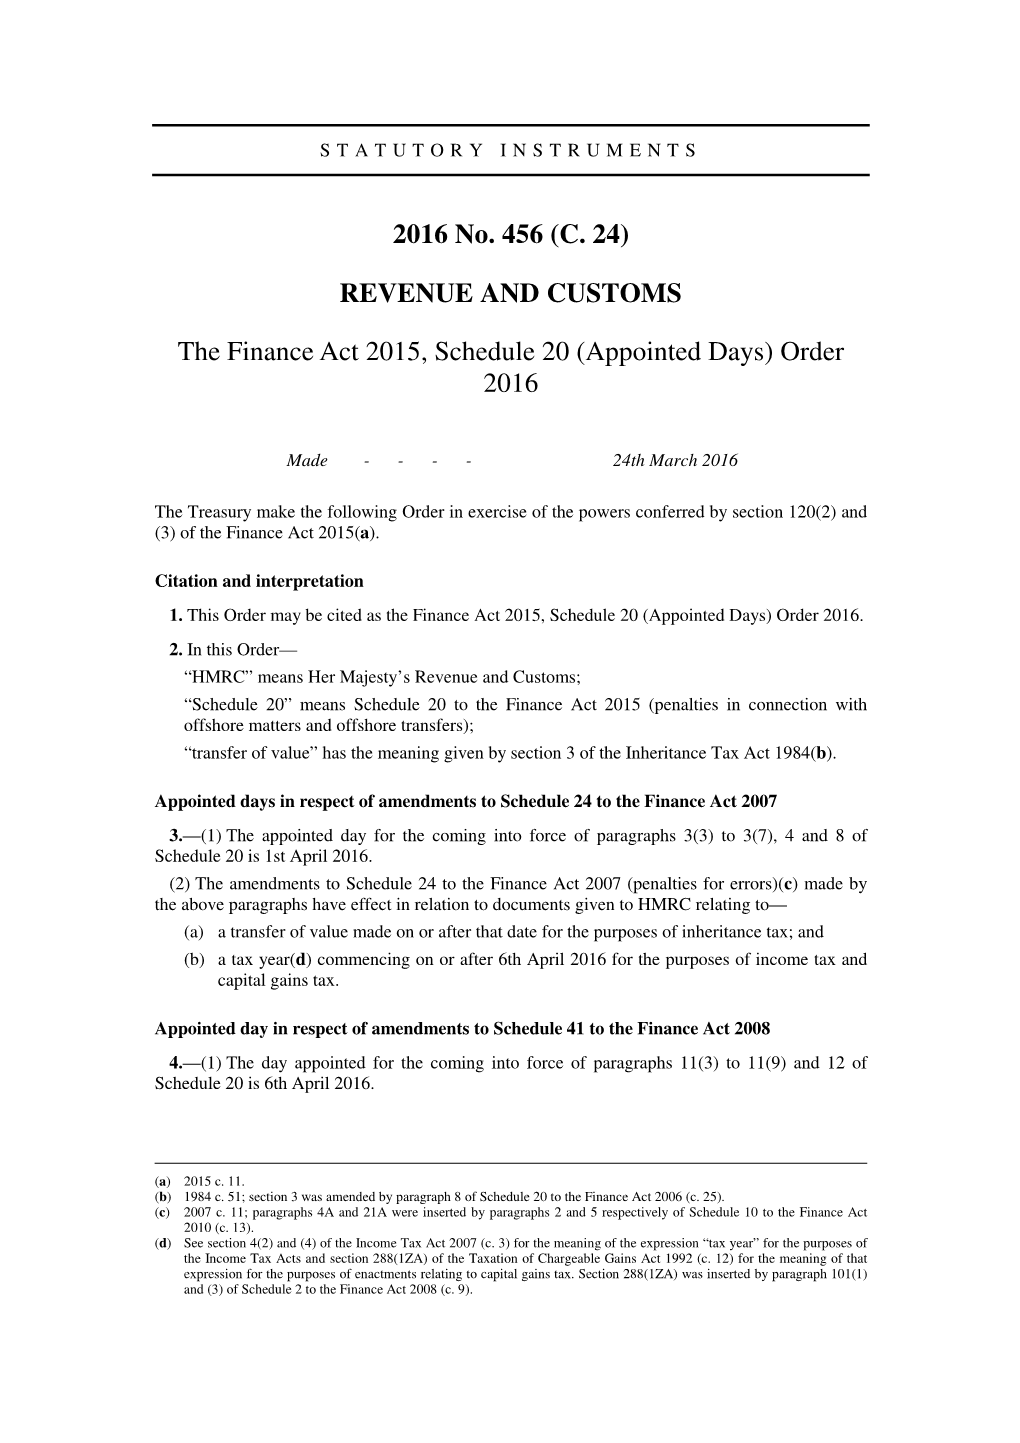 The Finance Act 2015, Schedule 20 (Appointed Days) Order 2016